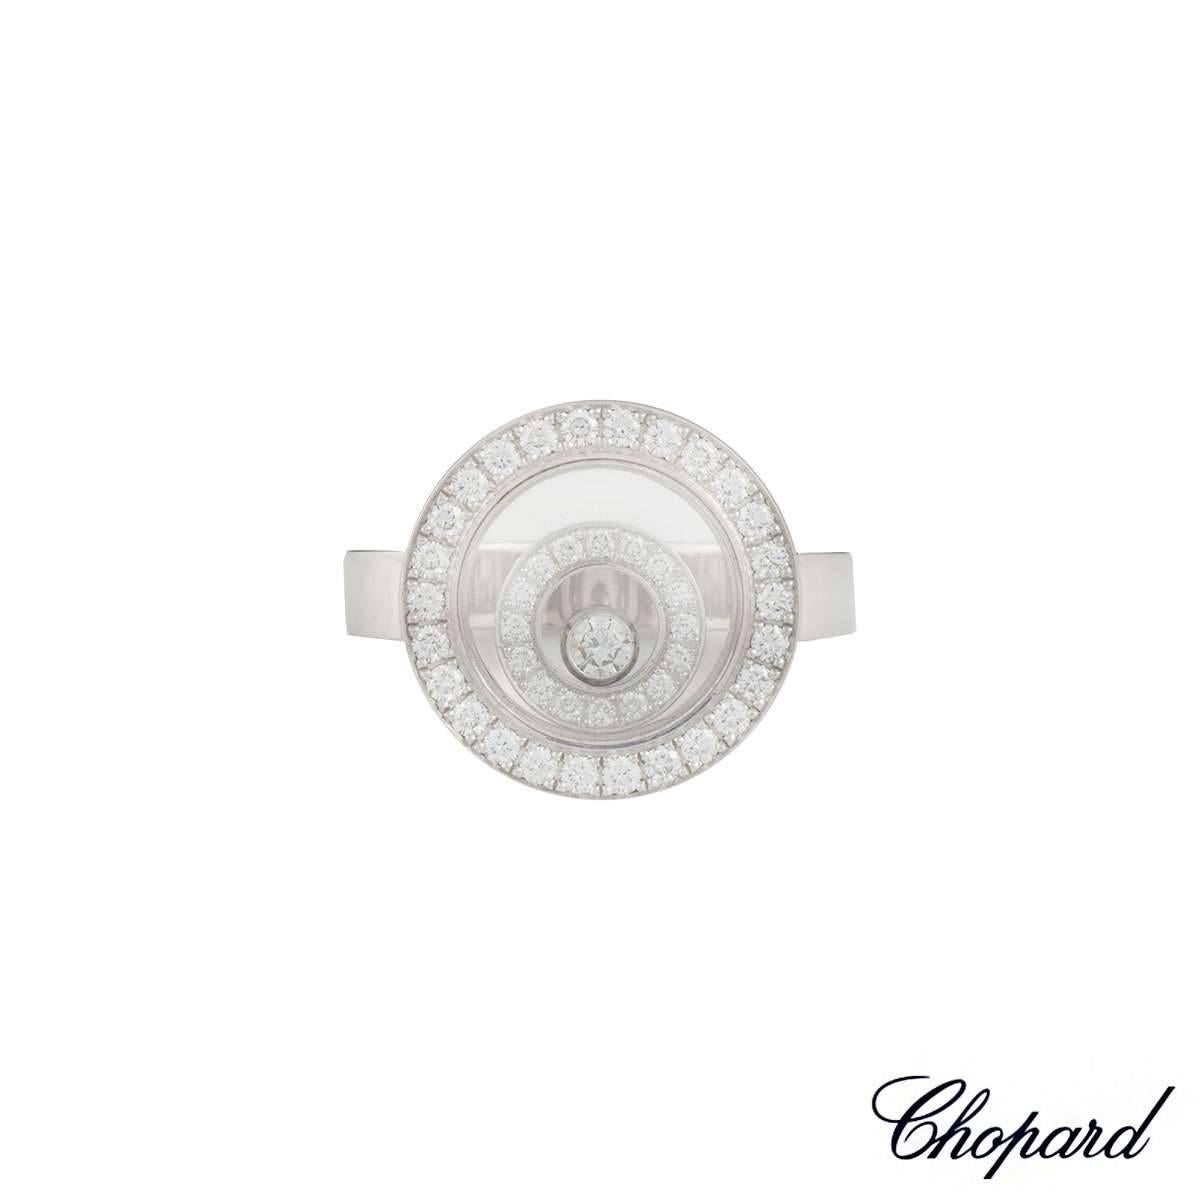 An 18k white gold ring from the Happy Spirit collection by Chopard. The circular ring consists of a diamond set outer case with a further diamond set circular floating motif, complimented by a single floating diamond in the centre. The ring has a